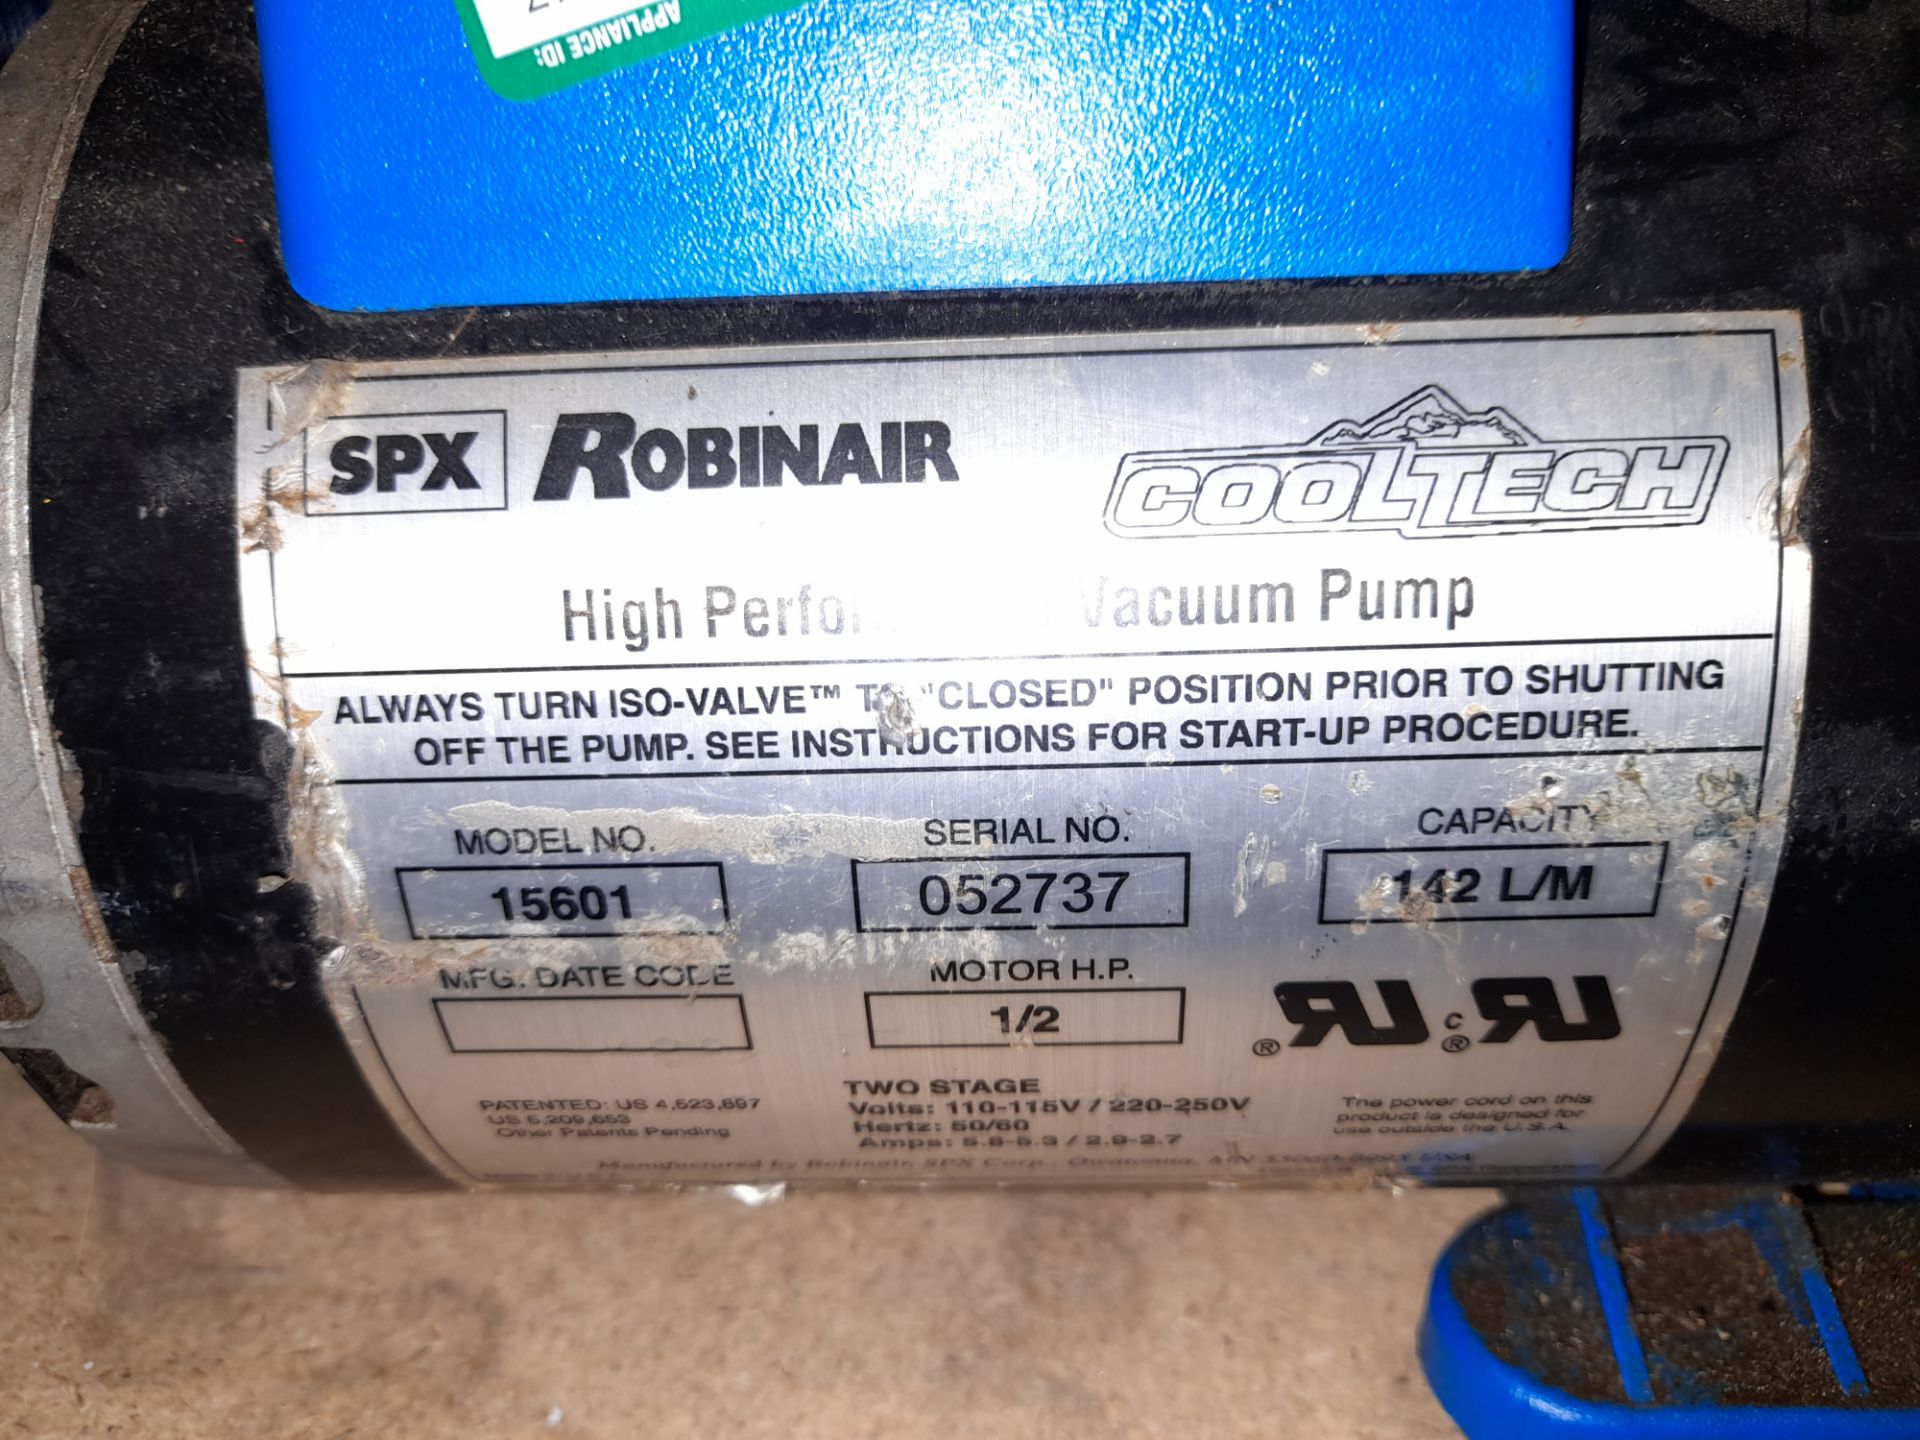 Robinair Cooltech 15601 High Performance Vacuum Pump 110v, serial number 052737 - Image 2 of 2